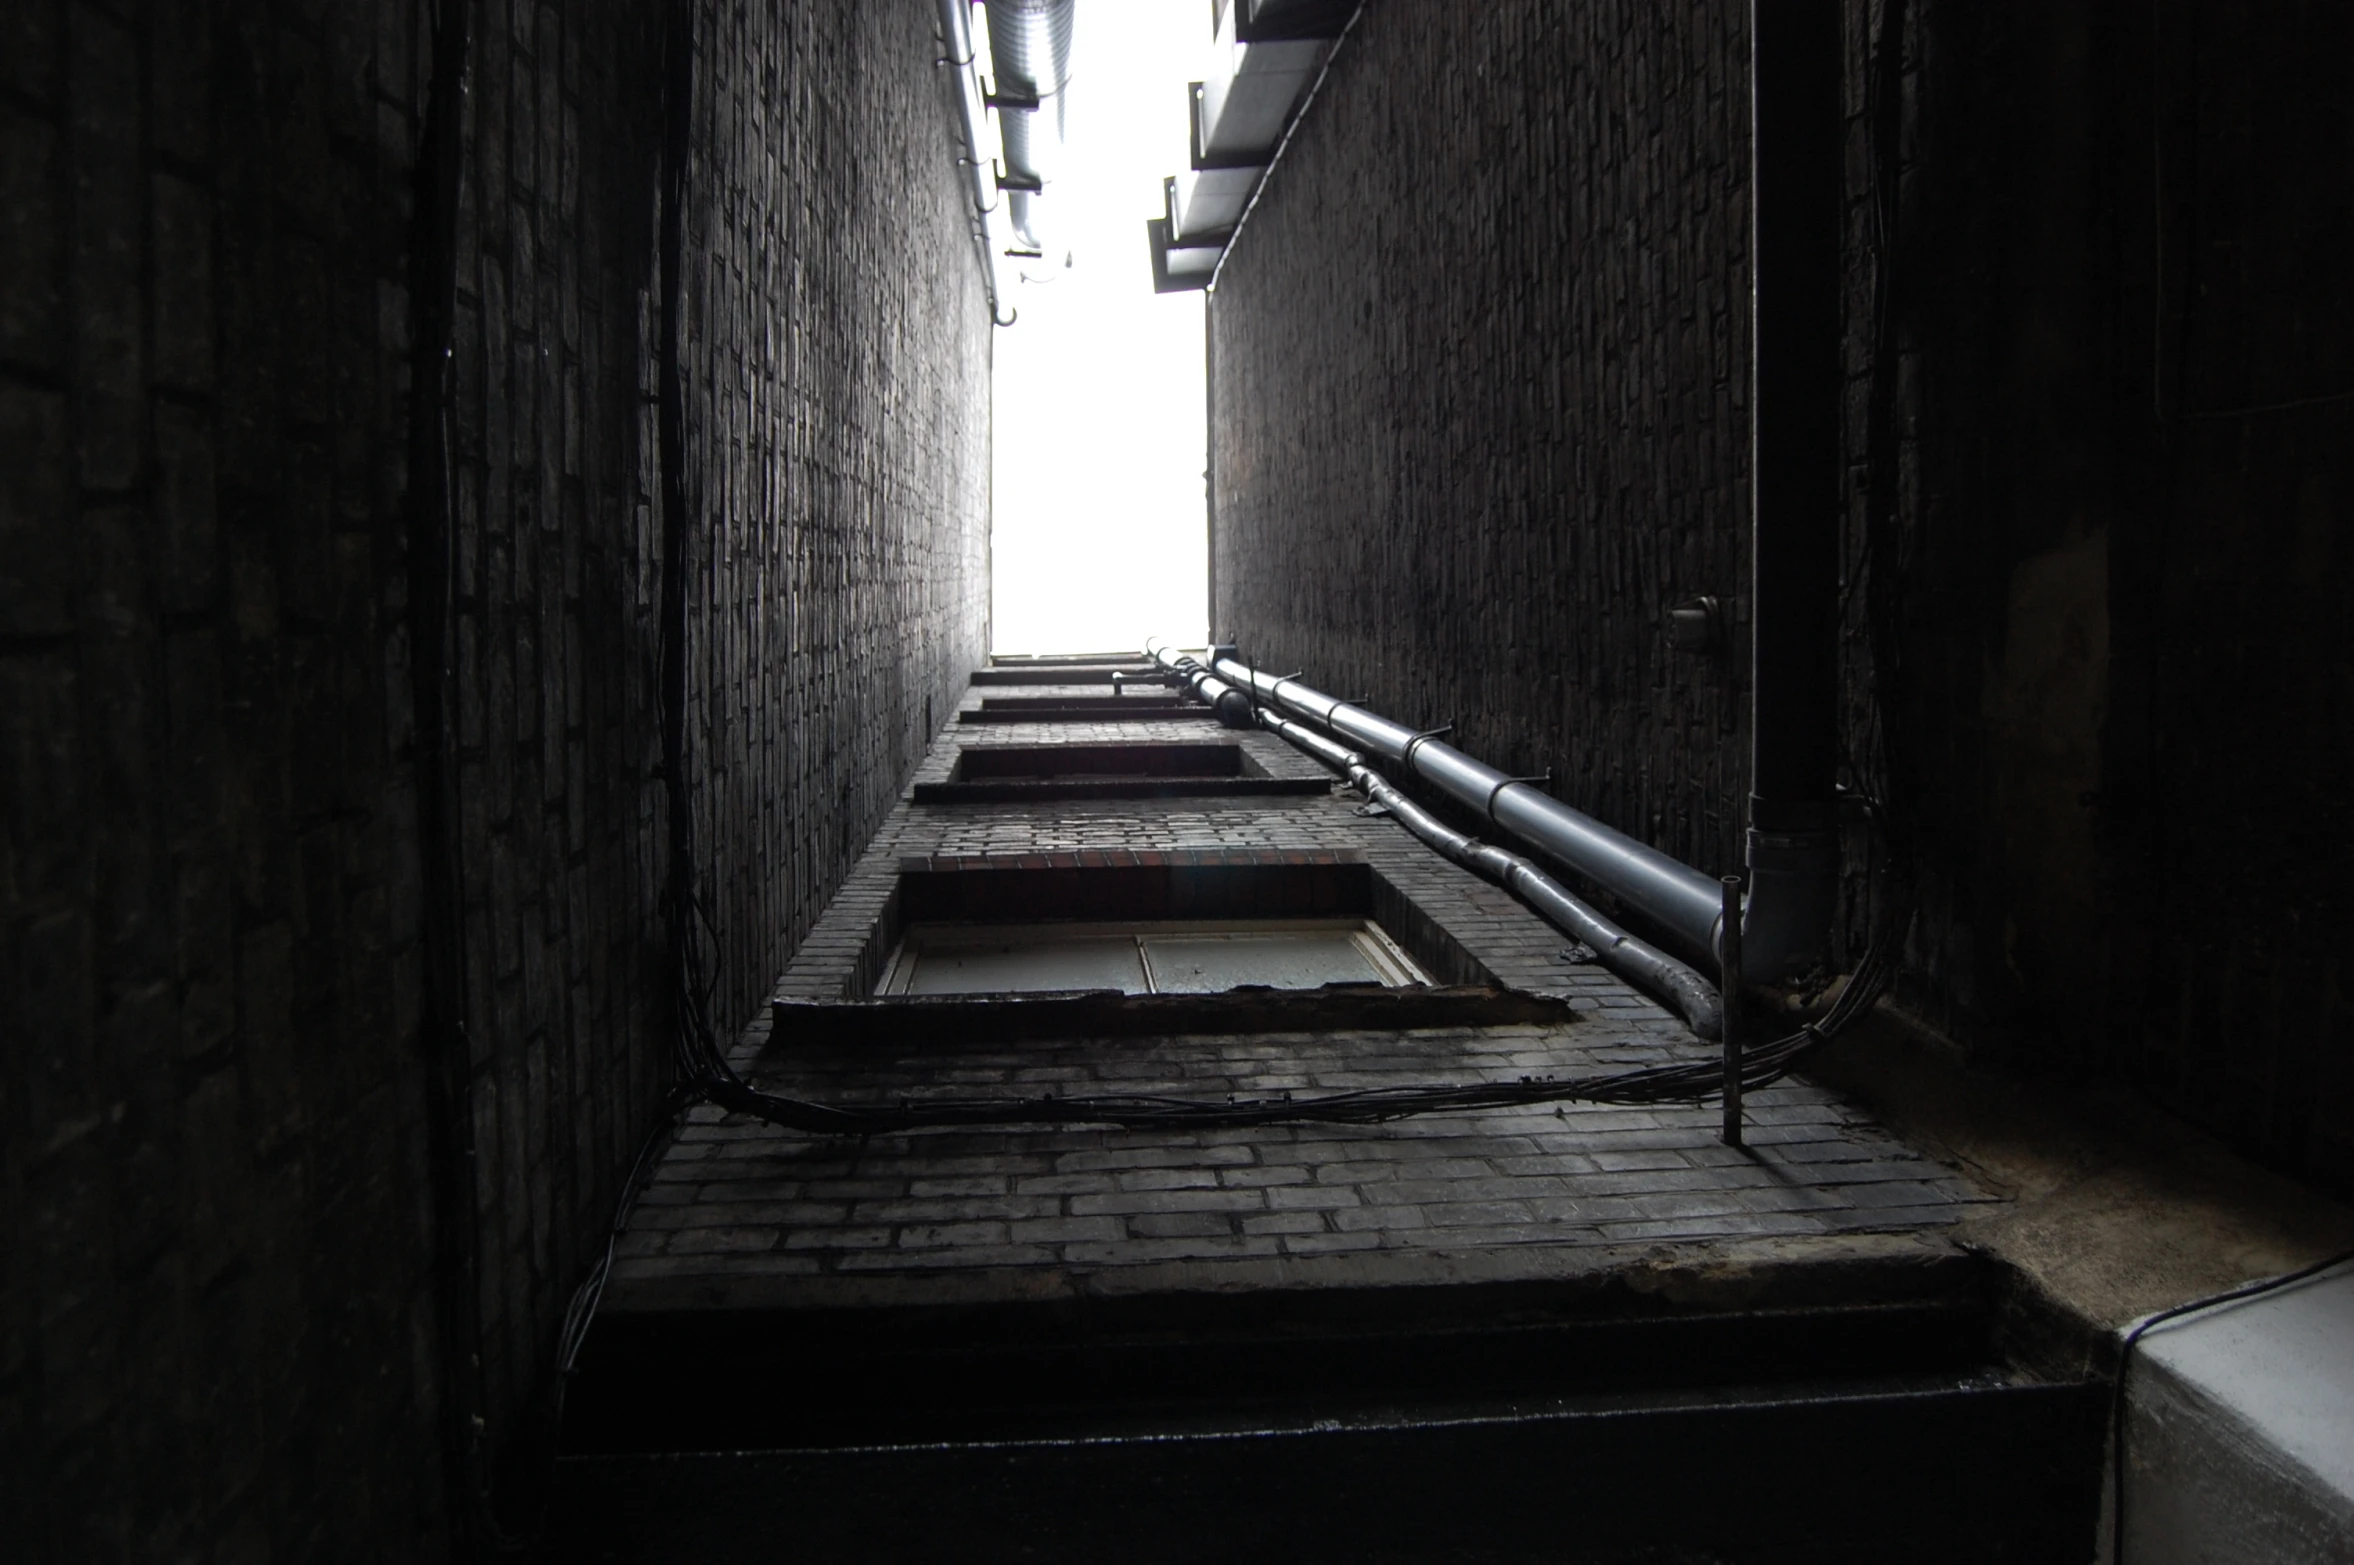 alleyway to an exit with the light filtering in